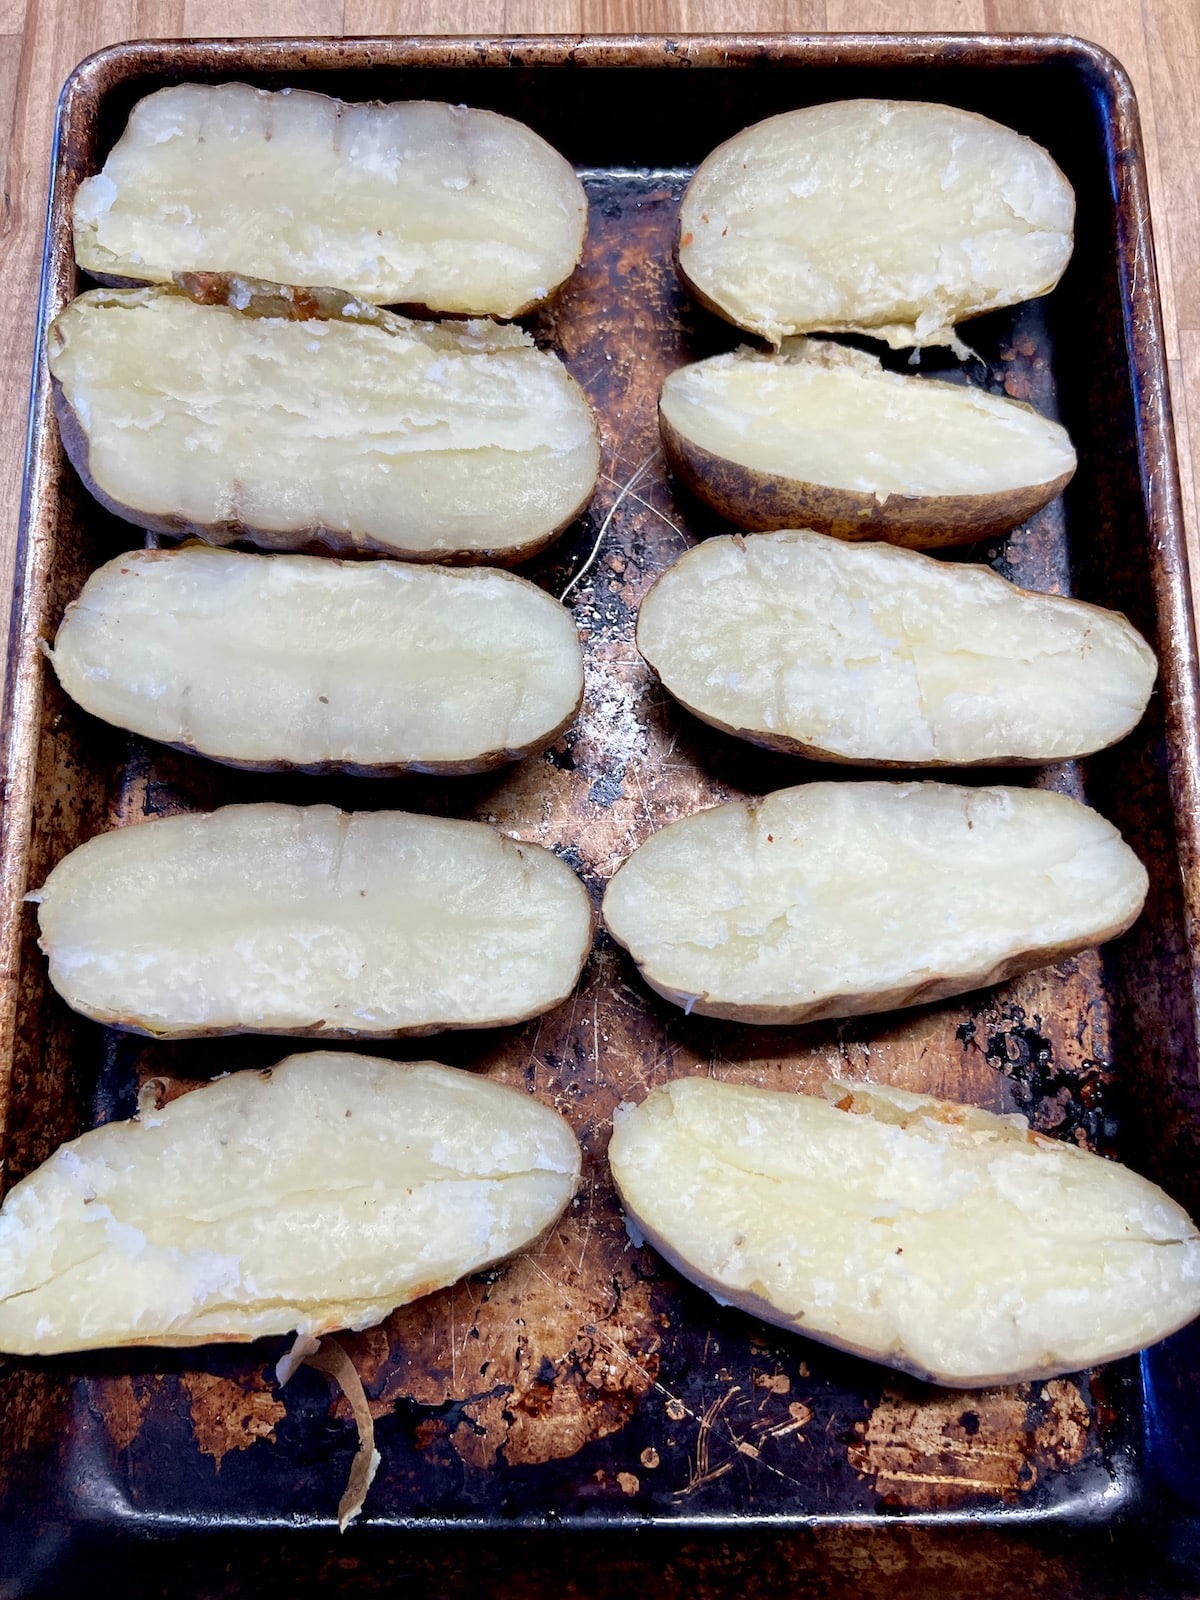 Baked potatoes sliced in half on a sheet pan.